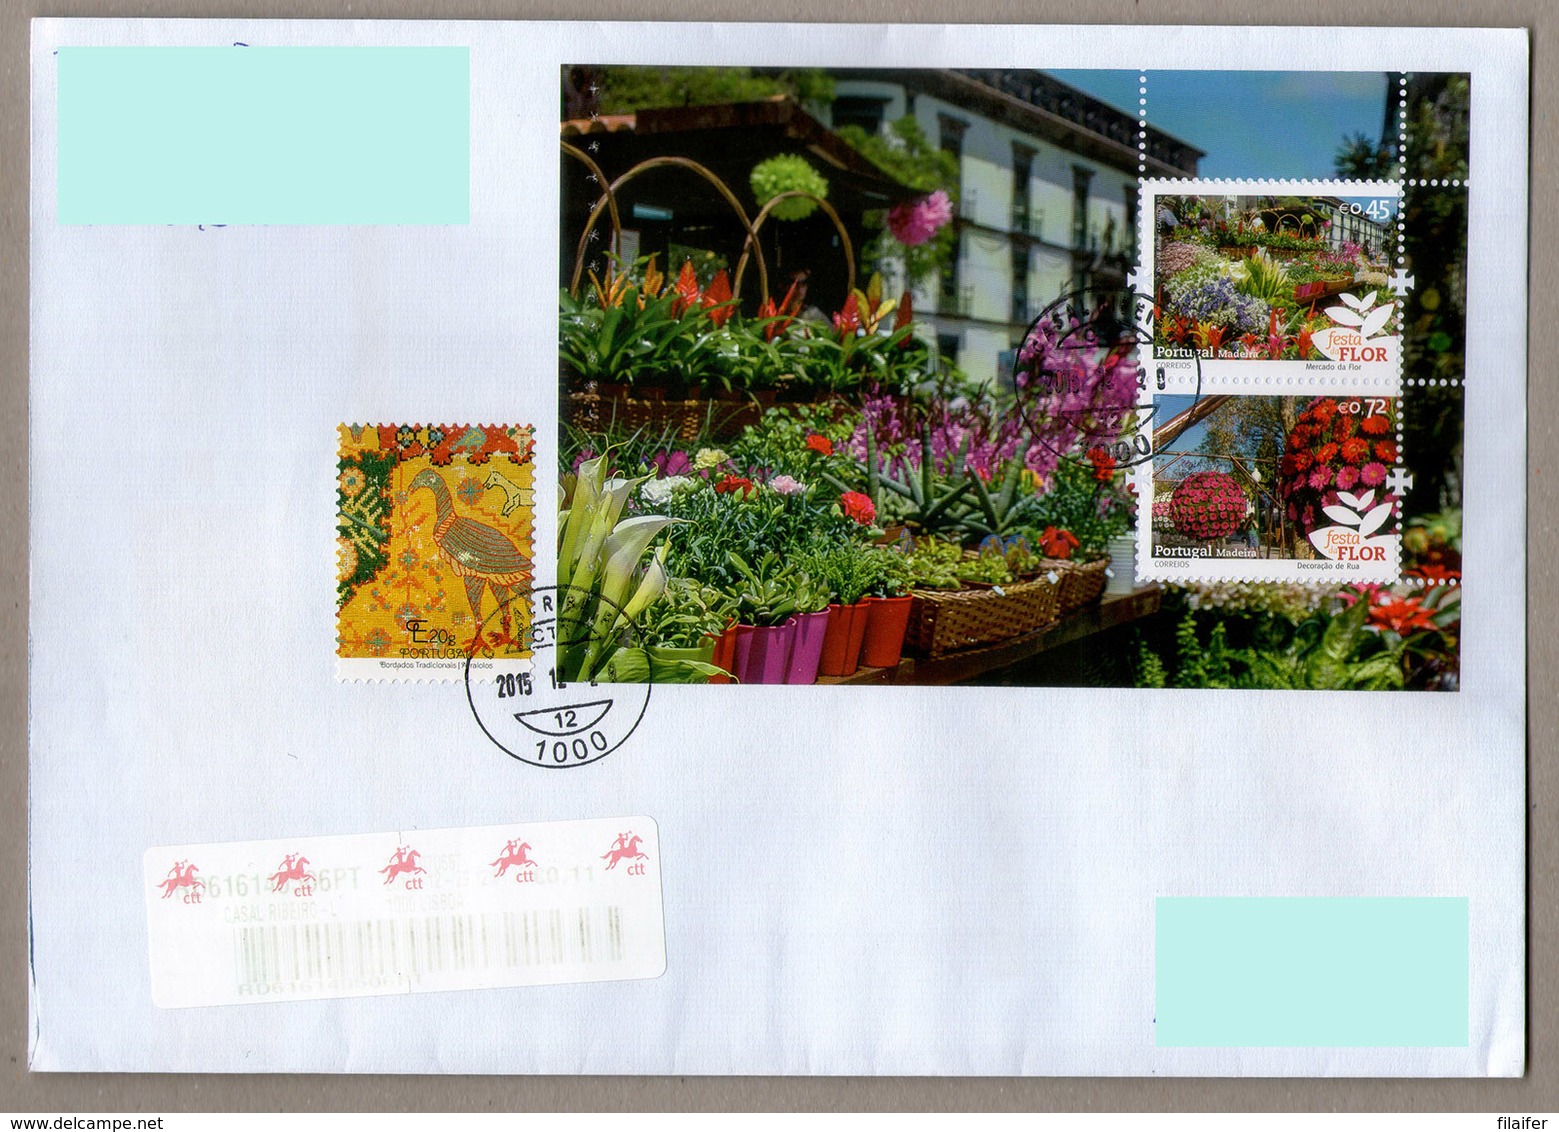 Portugal Stamps - Madeira, From Anual Booklet Europe 2015 - Flower Festival - Used - Usati